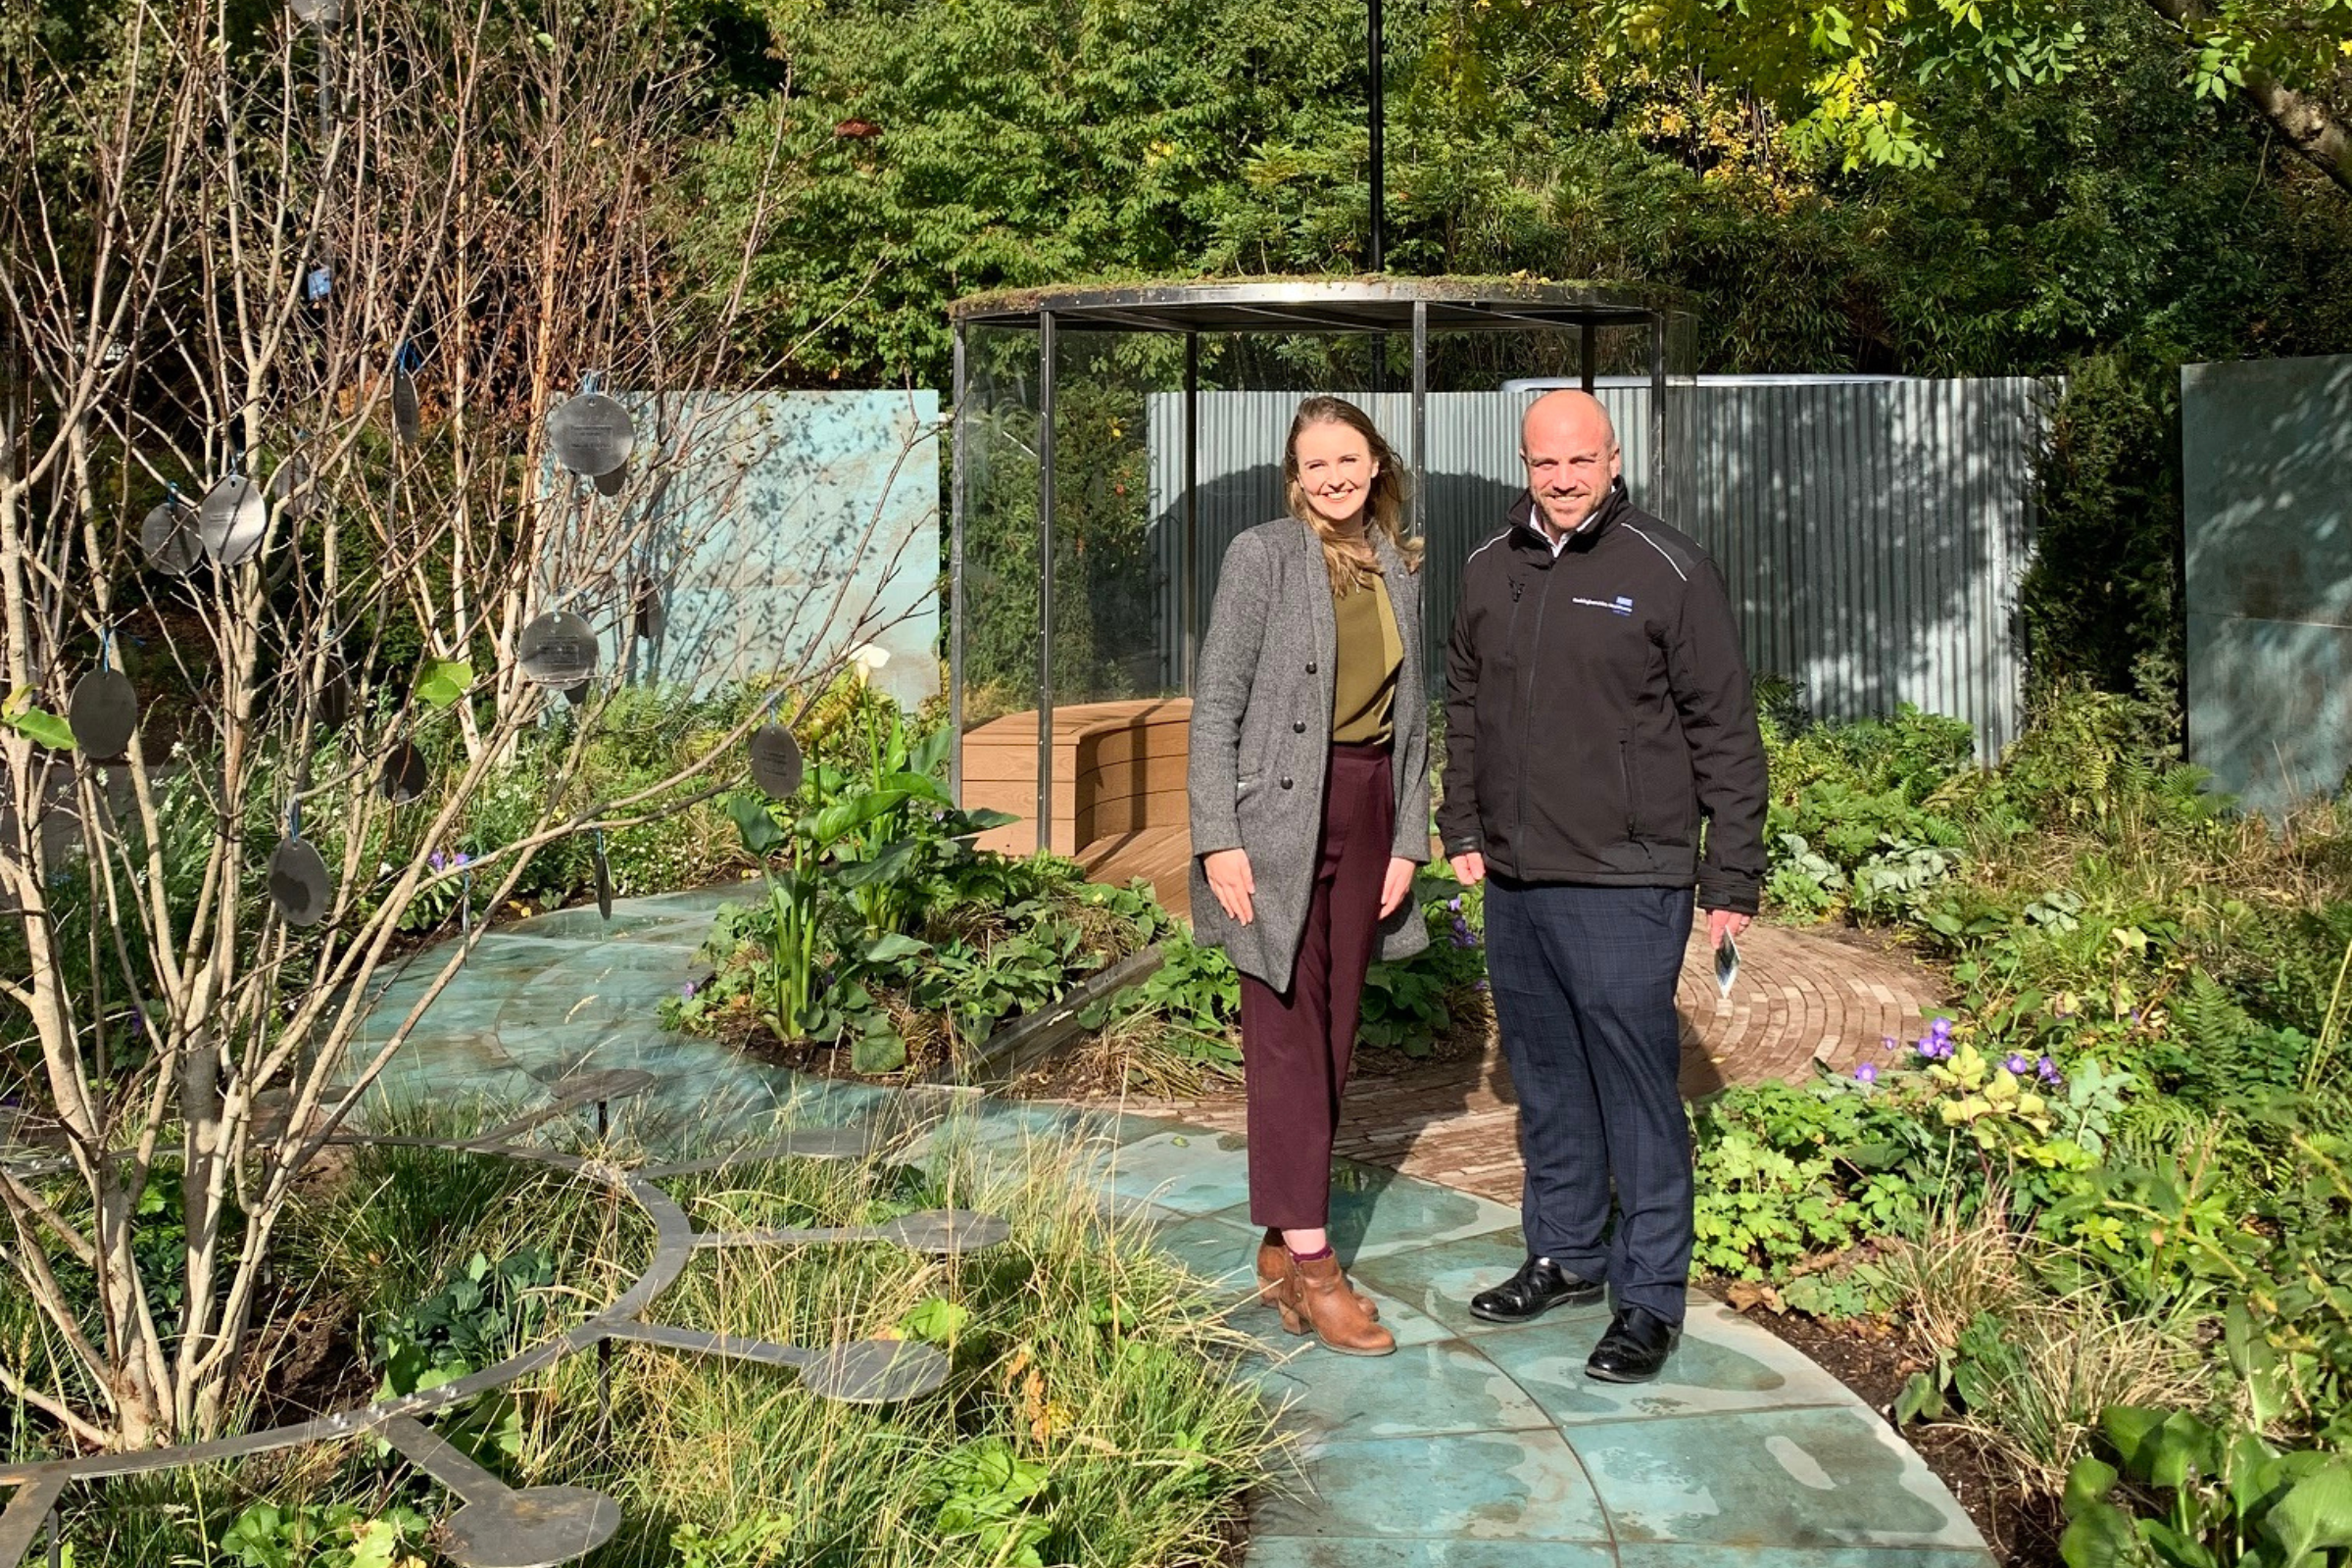 A white woman in her 30s and a white man in his 40s are stood in the new garden in winter coats. The copper-green path winds through the planting and a tree in the foreground has messages of thanks hanging in the branches